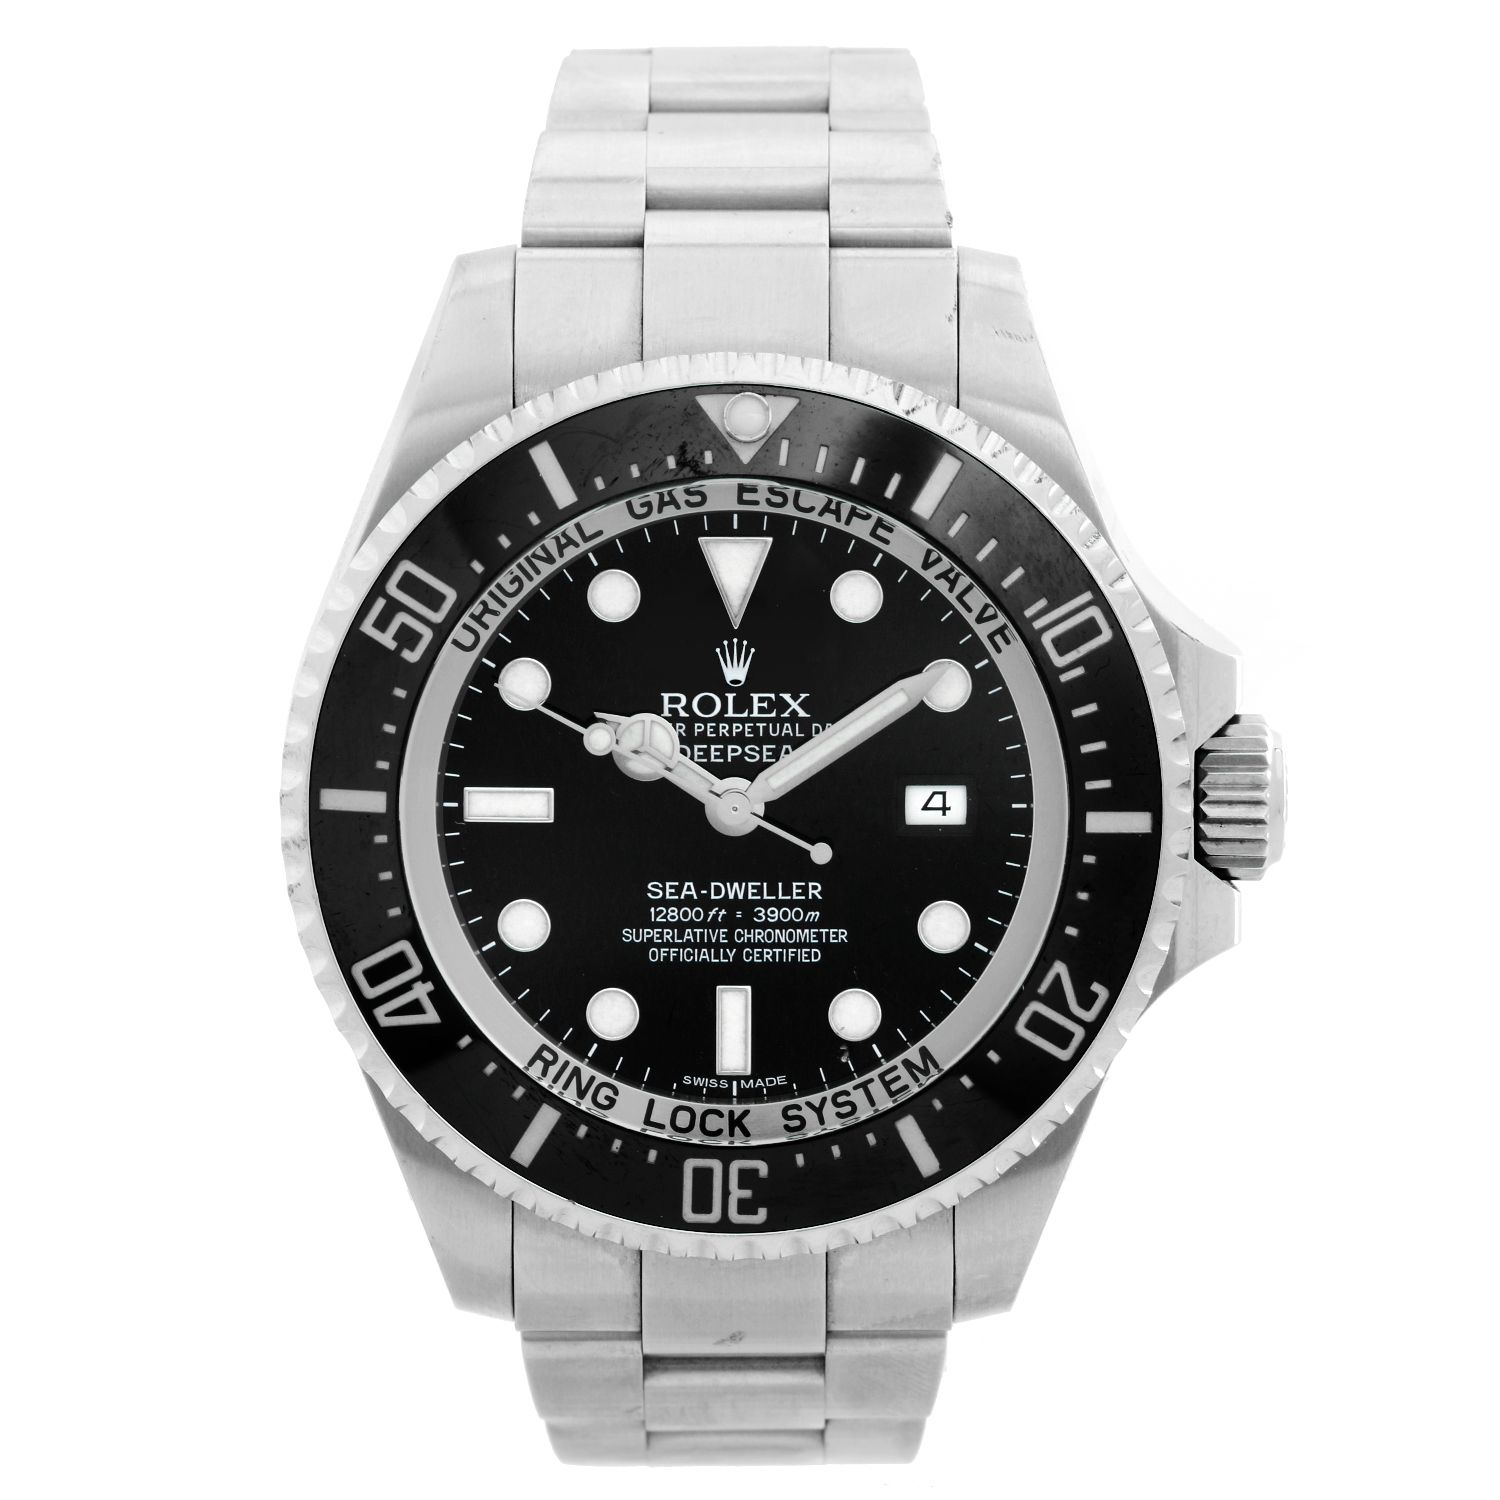 Pre-owned with Rolex box and card. Card dated 2013